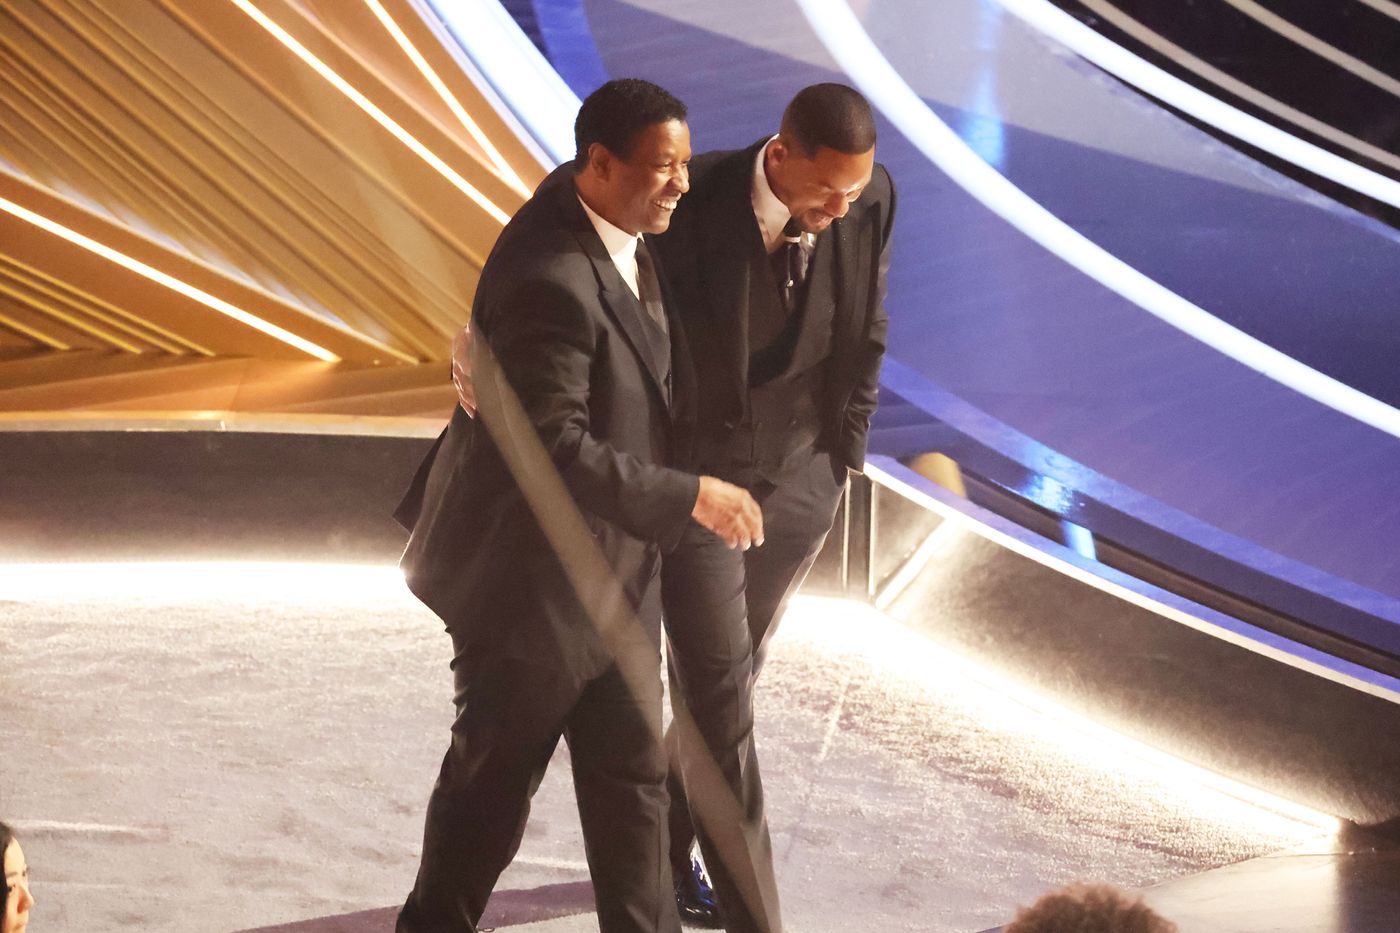 What I Saw at the Oscars After Will Smith Slapped Chris Rock